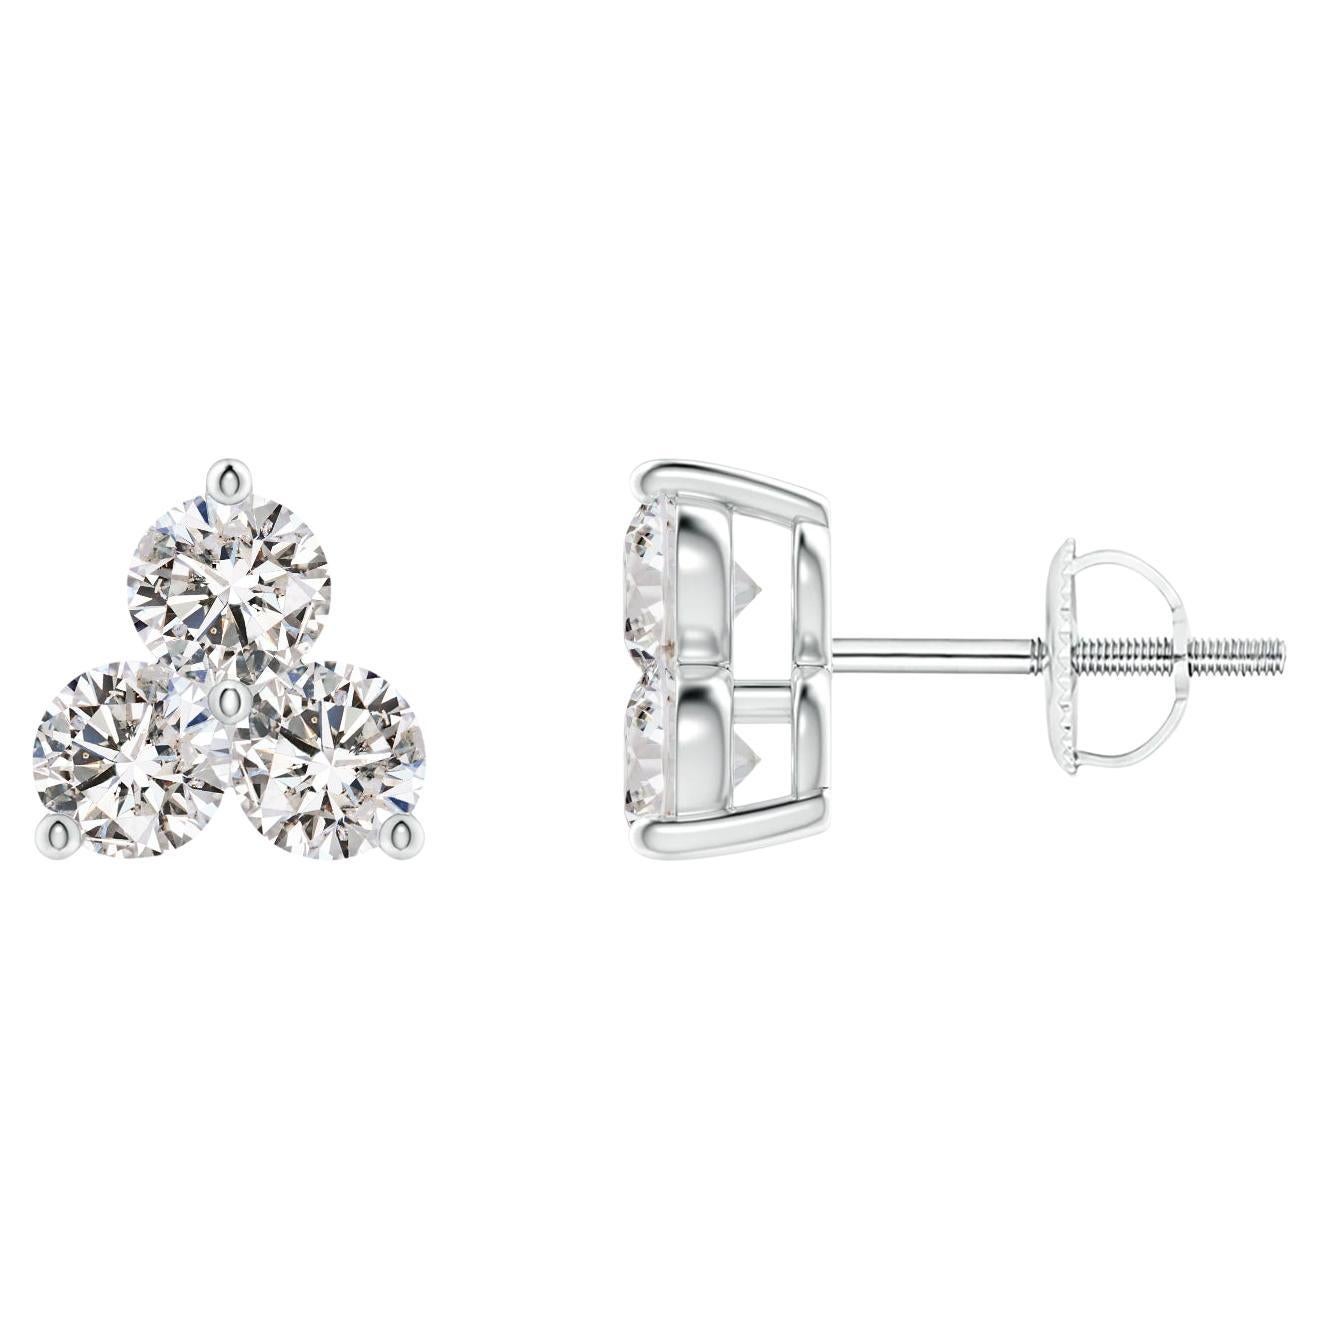 Natural Diamond Stud Earrings in 14K White Gold (0.5cttw Color-I-J Clarity-I1I2)